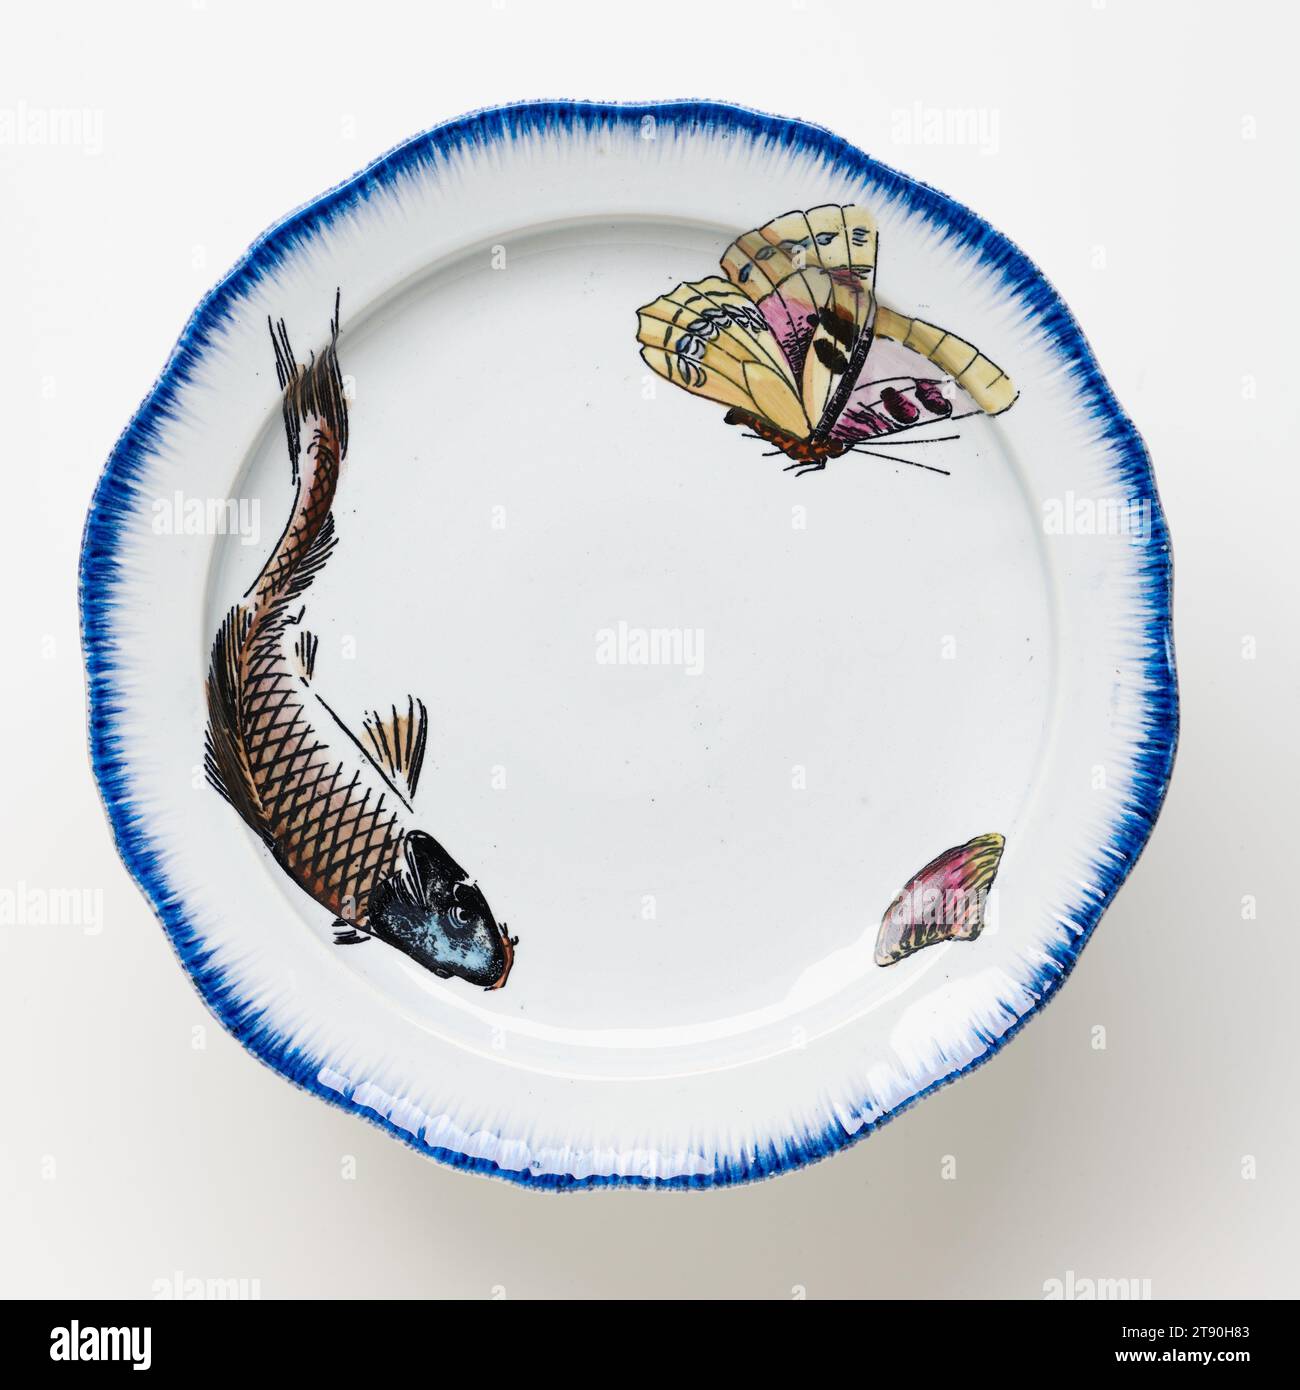 Cake plate with fish, butterfly, and shell, 1866-1867, Félix Bracquemond; Manufacturer: Lebeuf, Milliet & Co., Creil; Retailer: Francois-Eugene Rousseau, French, 1833–1914, 3 × 8 3/4 in. (7.62 × 22.23 cm), Lead-glazed earthenware, transfer printing, France, 19th century, This platter and three footed plates come from a large table service commissioned by the French dealer and publisher Eugène Rousseau (1827-1890) and designed by the painter and print maker Felix Bracquemond. First exhibited in Paris at the Universal Exhibition in 1867 Stock Photo